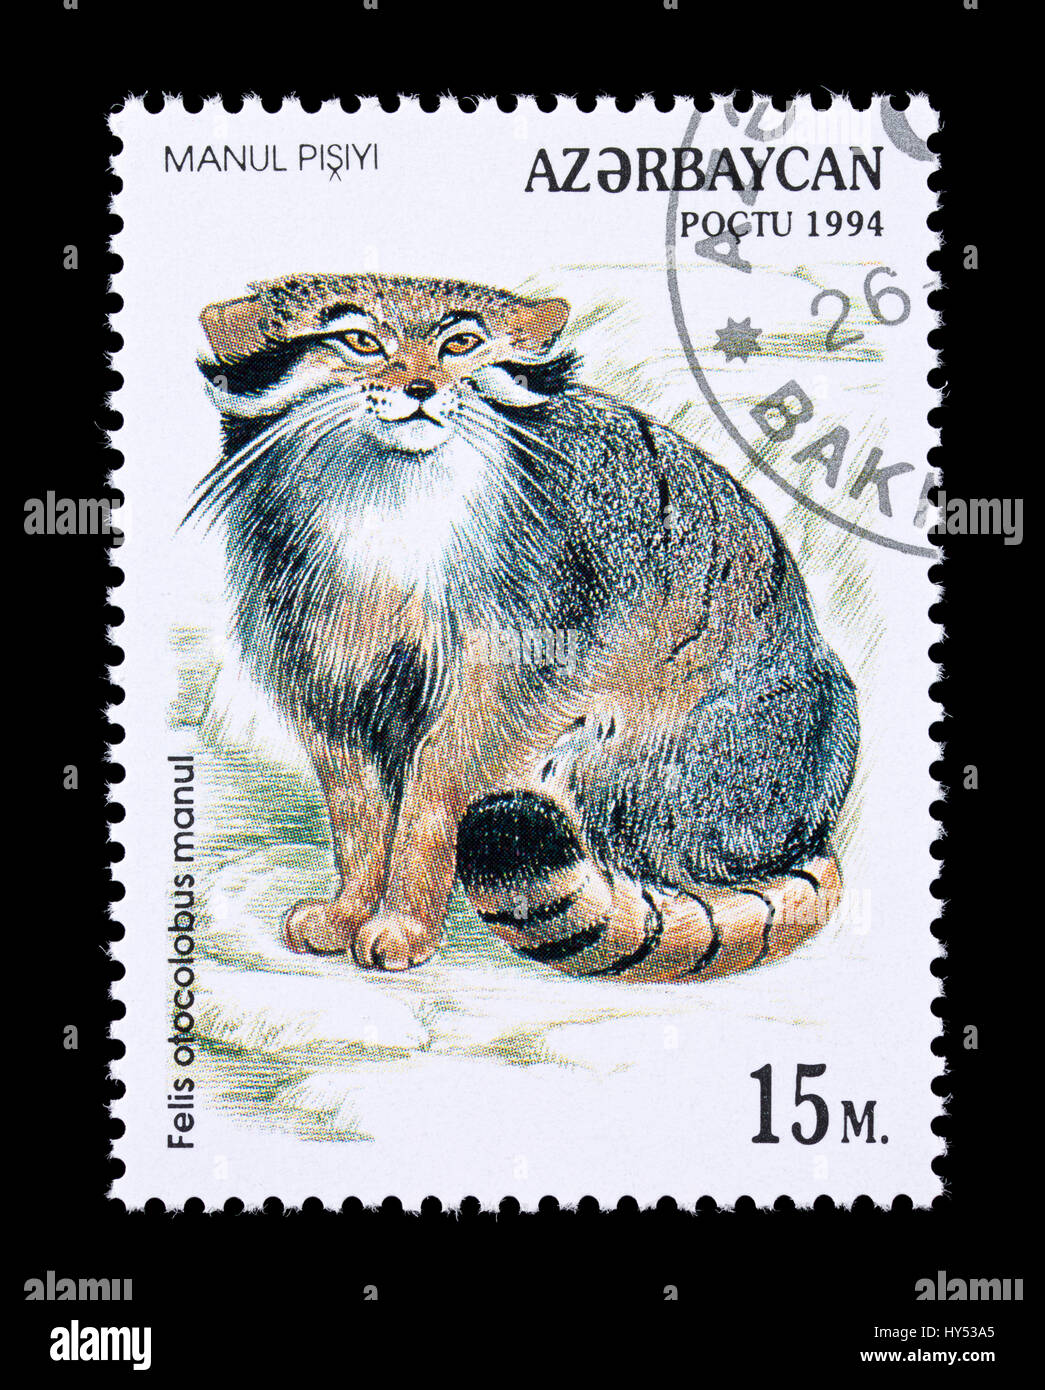 Postage stamp from Azerbaijan depicting a  Pallas's cat (Otocolobus manul), Stock Photo